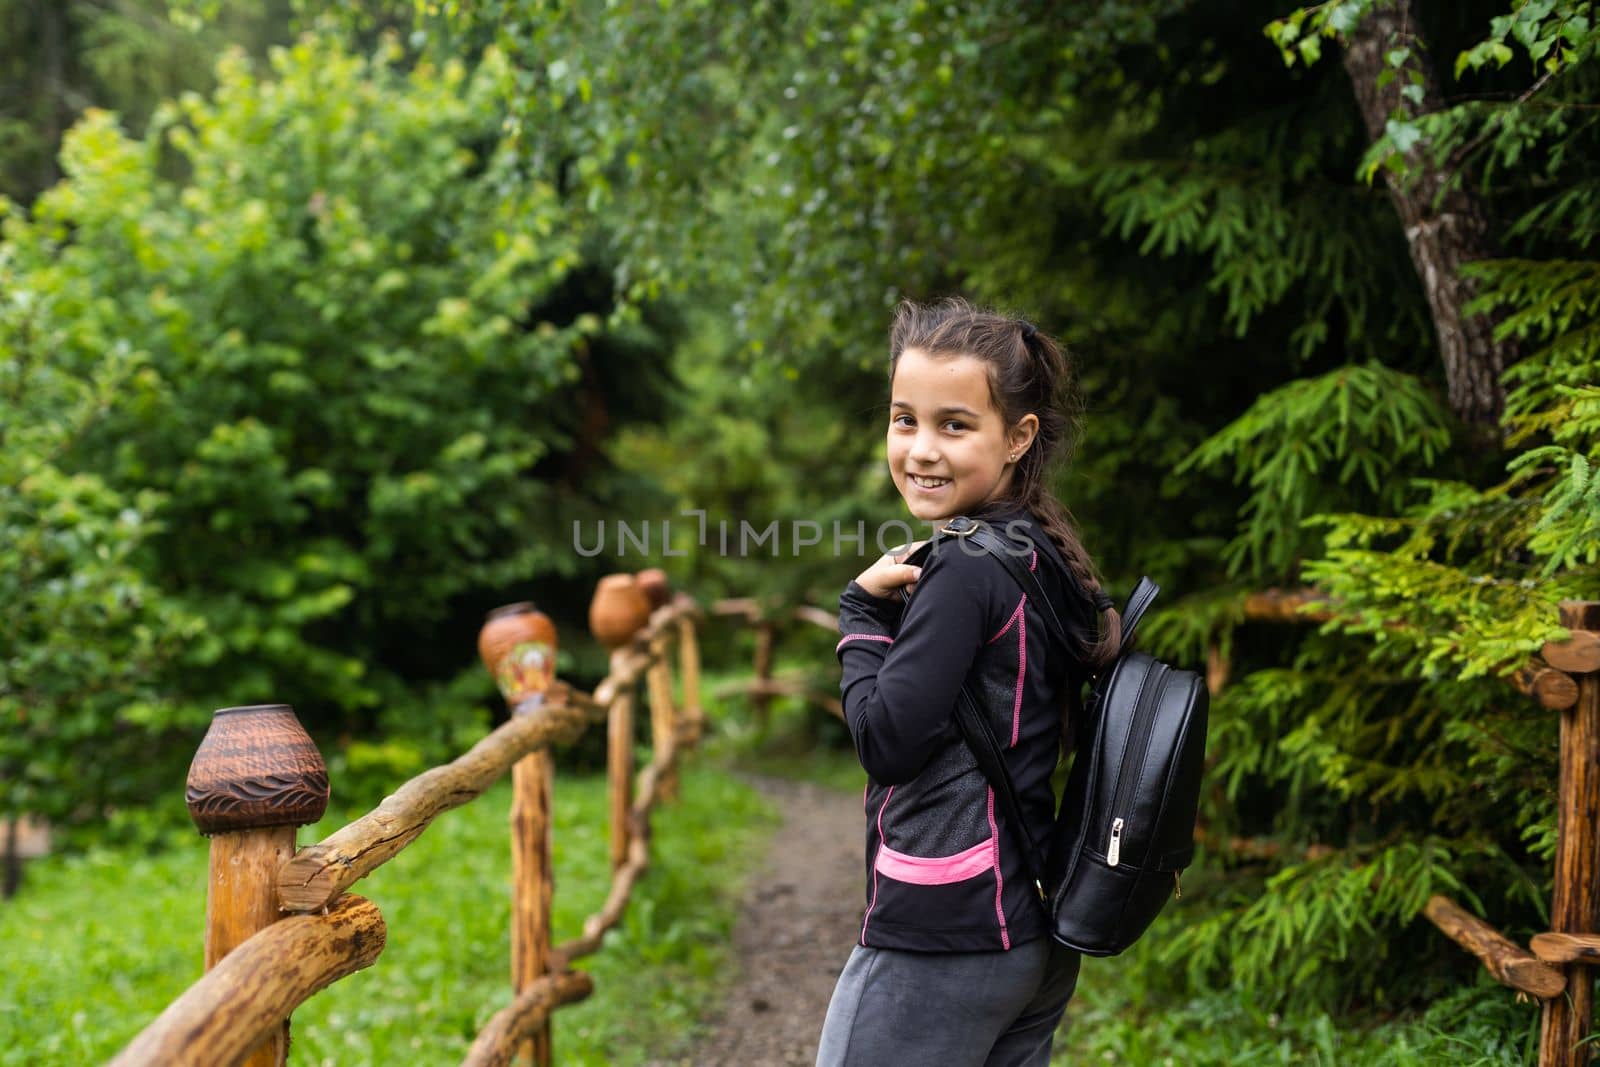 Back to school. Cute child girl with backpack going to school with fun.